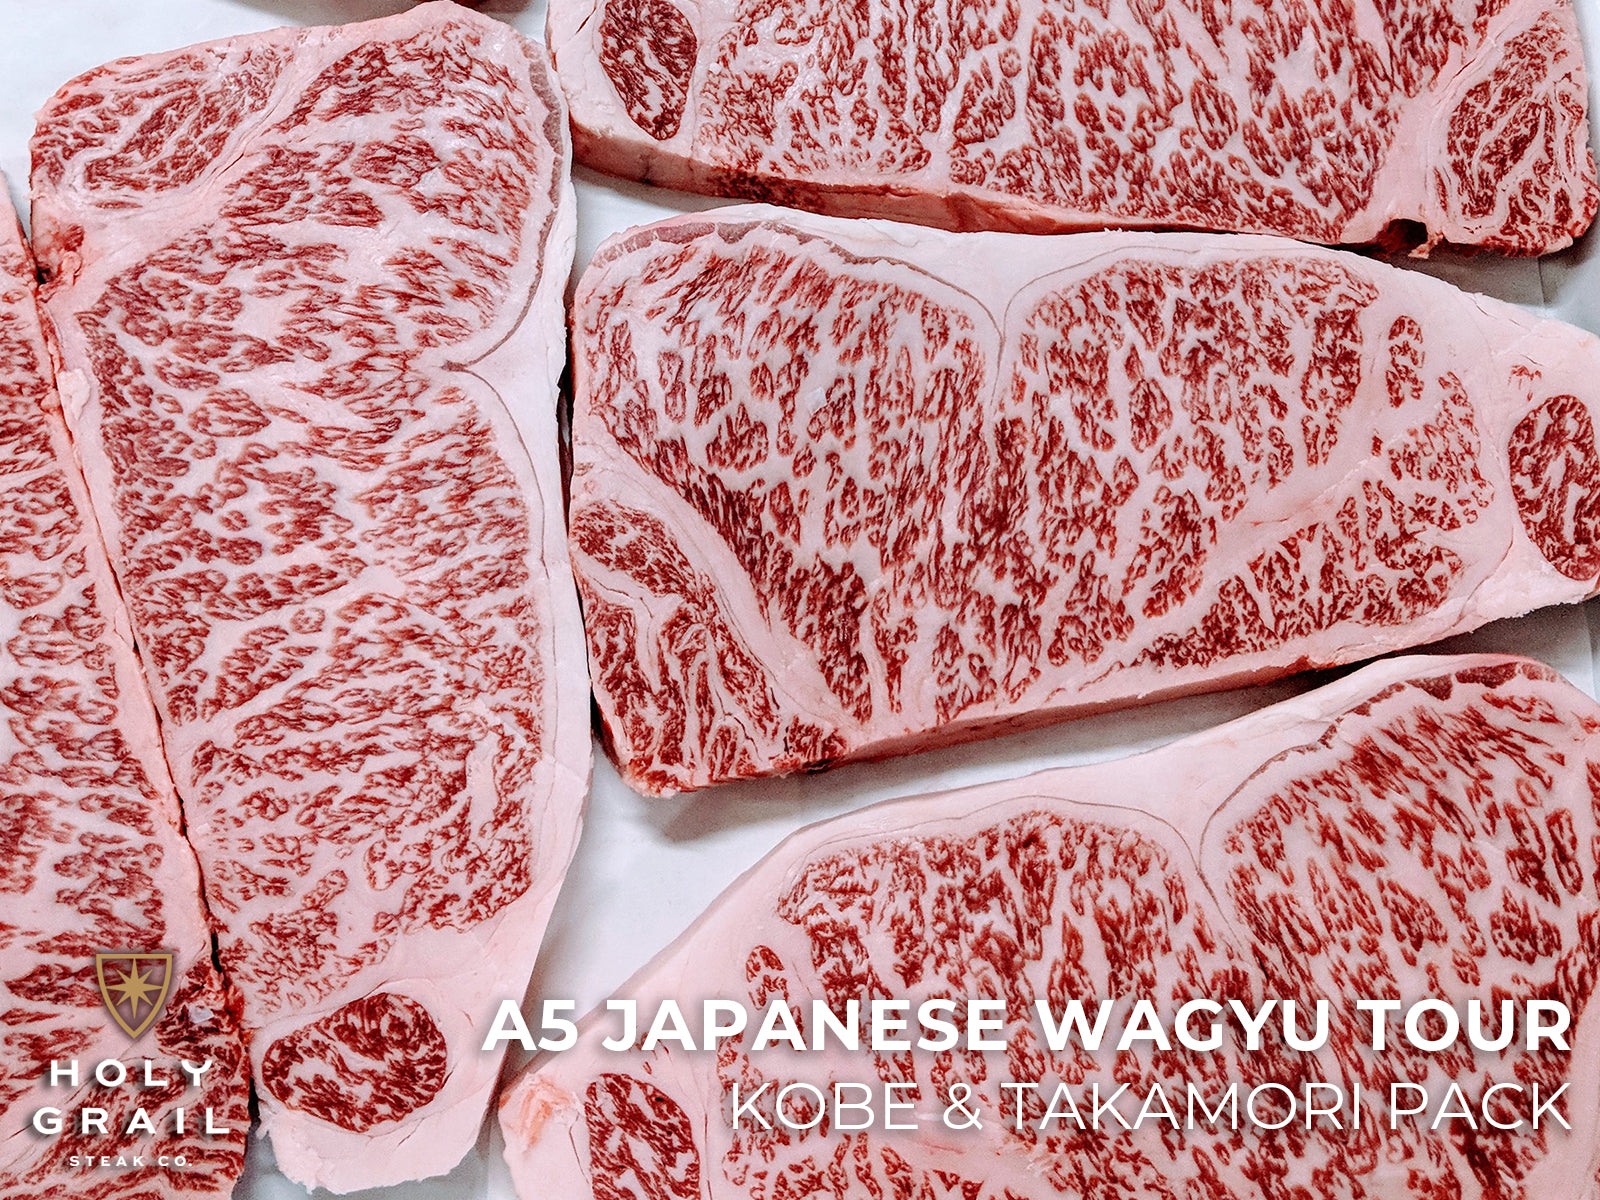 Holy Grail - 25% Off Japanese A5 Wagyu Tour Pack